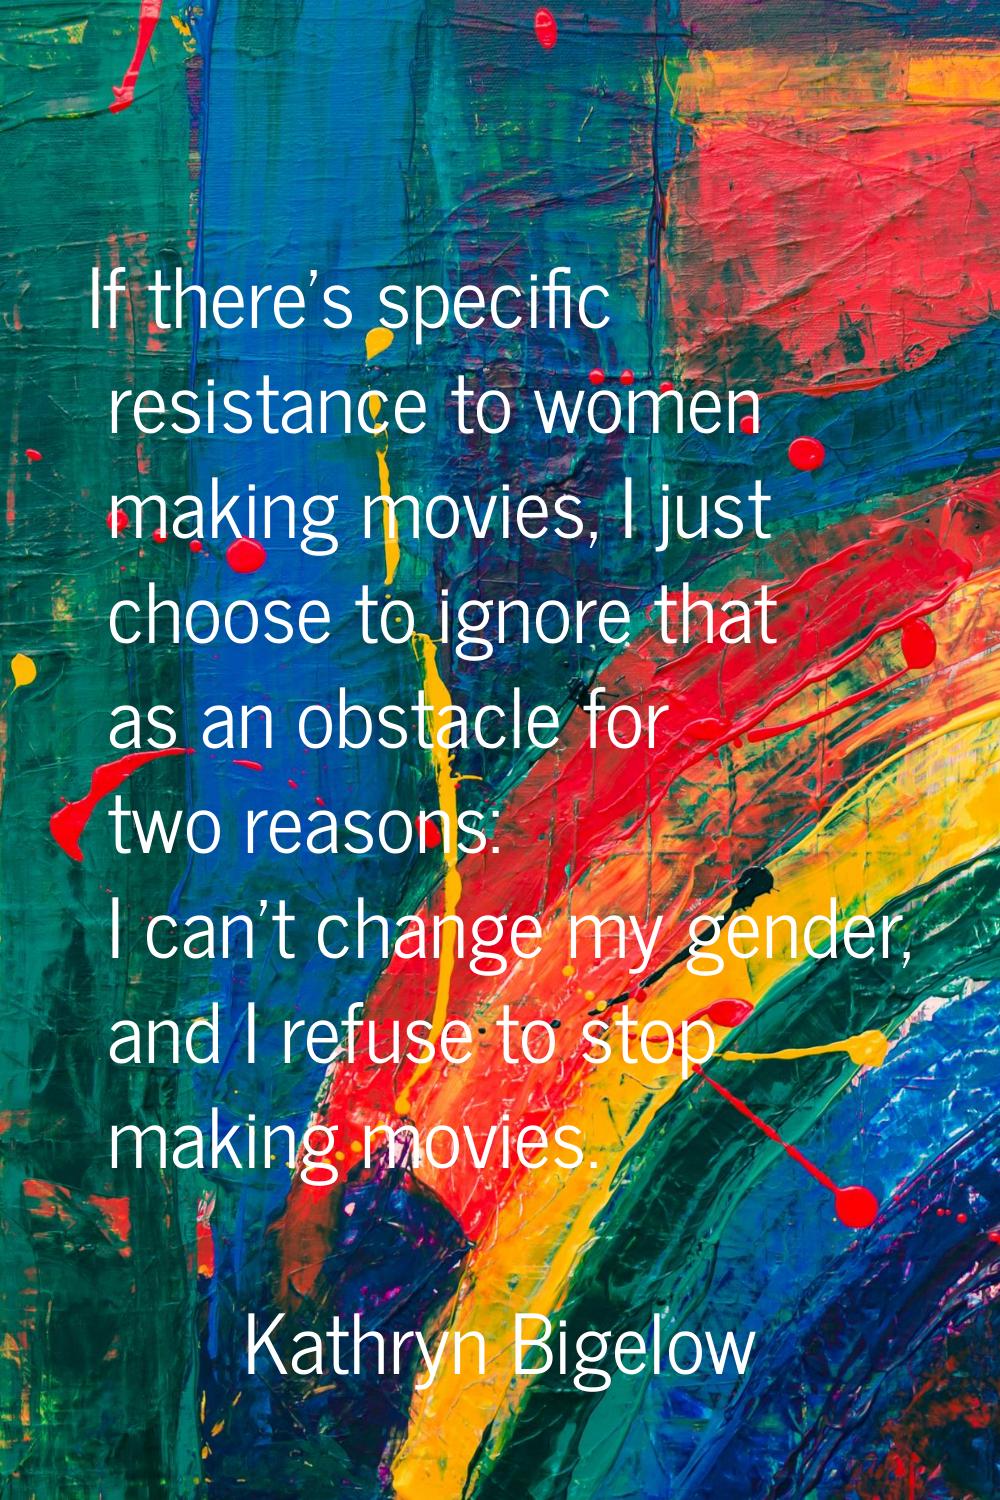 If there's specific resistance to women making movies, I just choose to ignore that as an obstacle 